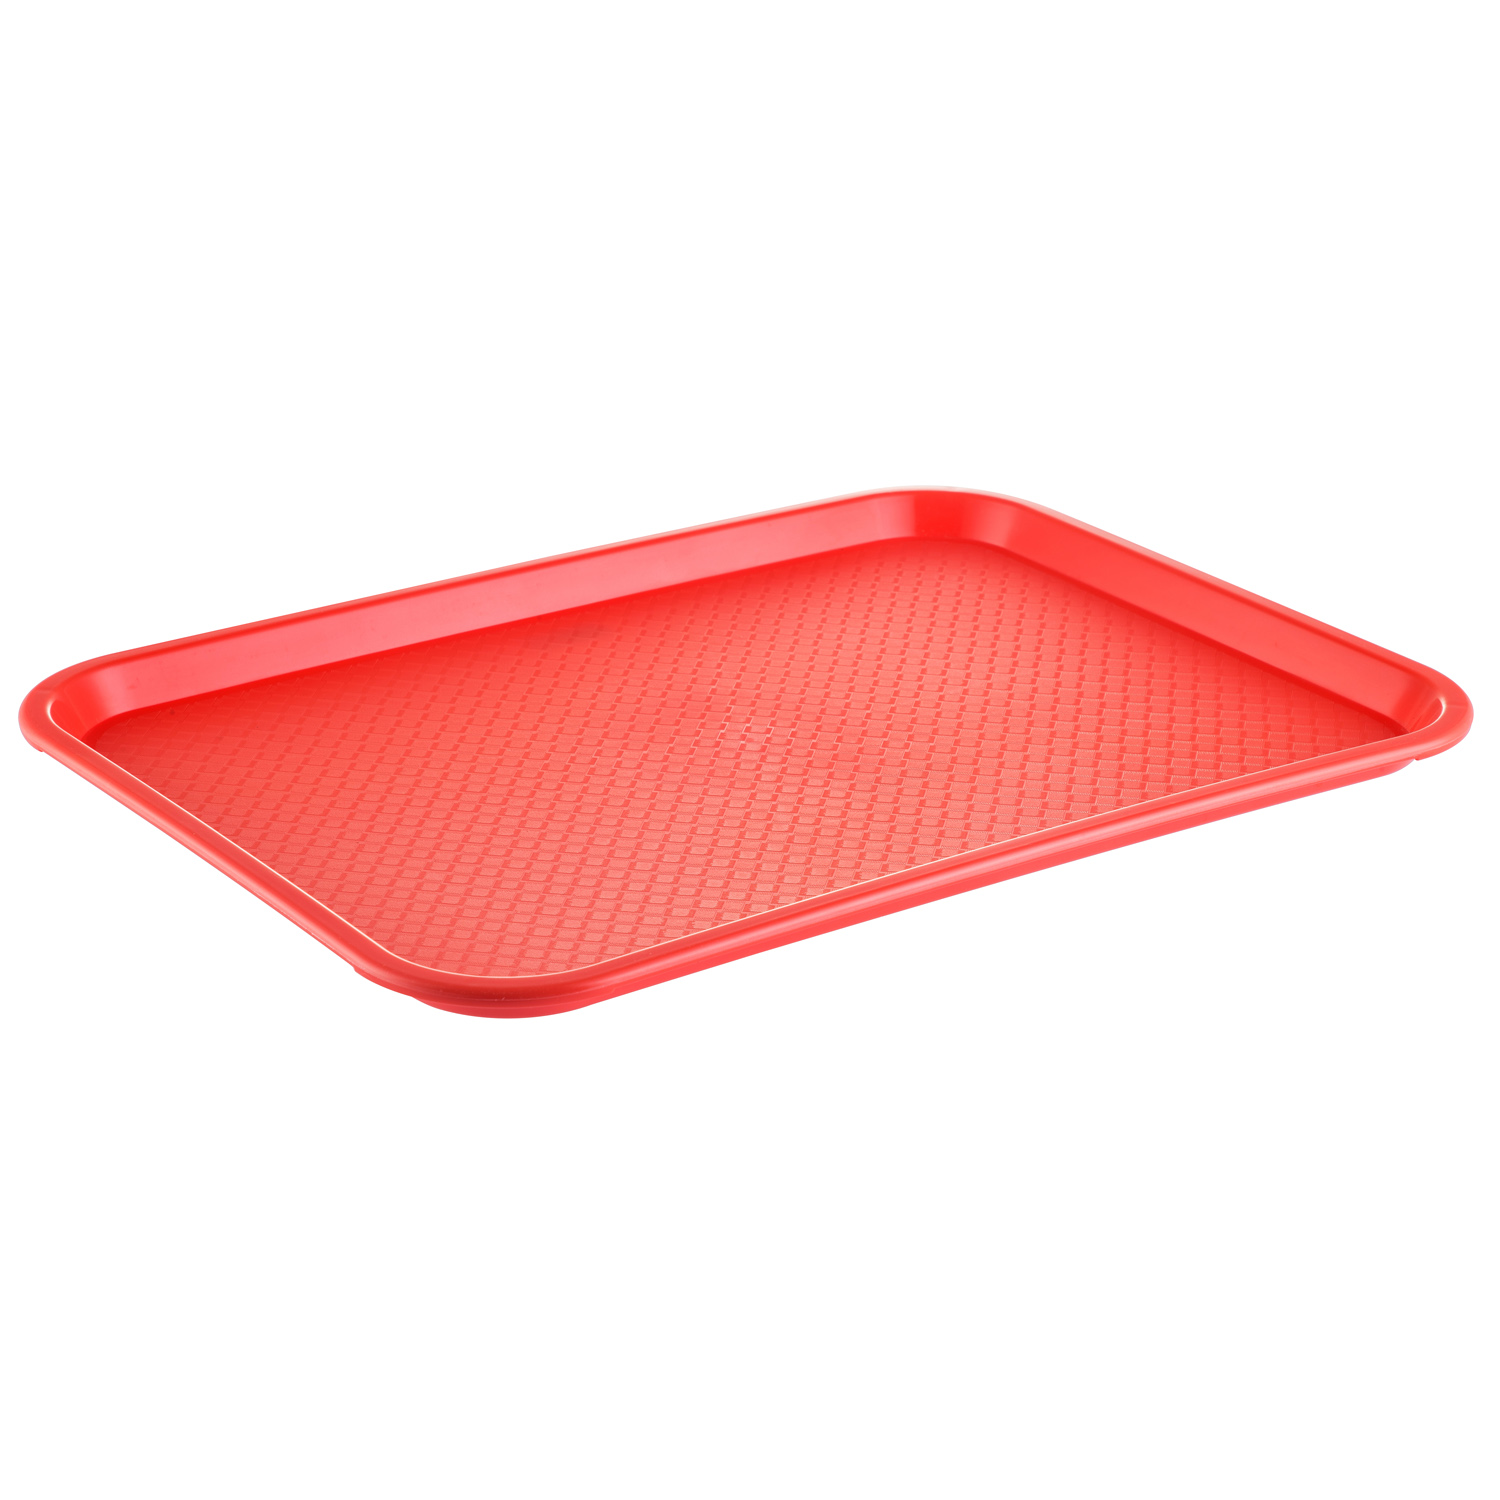 CAC China DSPT-1216OR Orange Fast Food/Cafeteria Tray, 16" x 12"